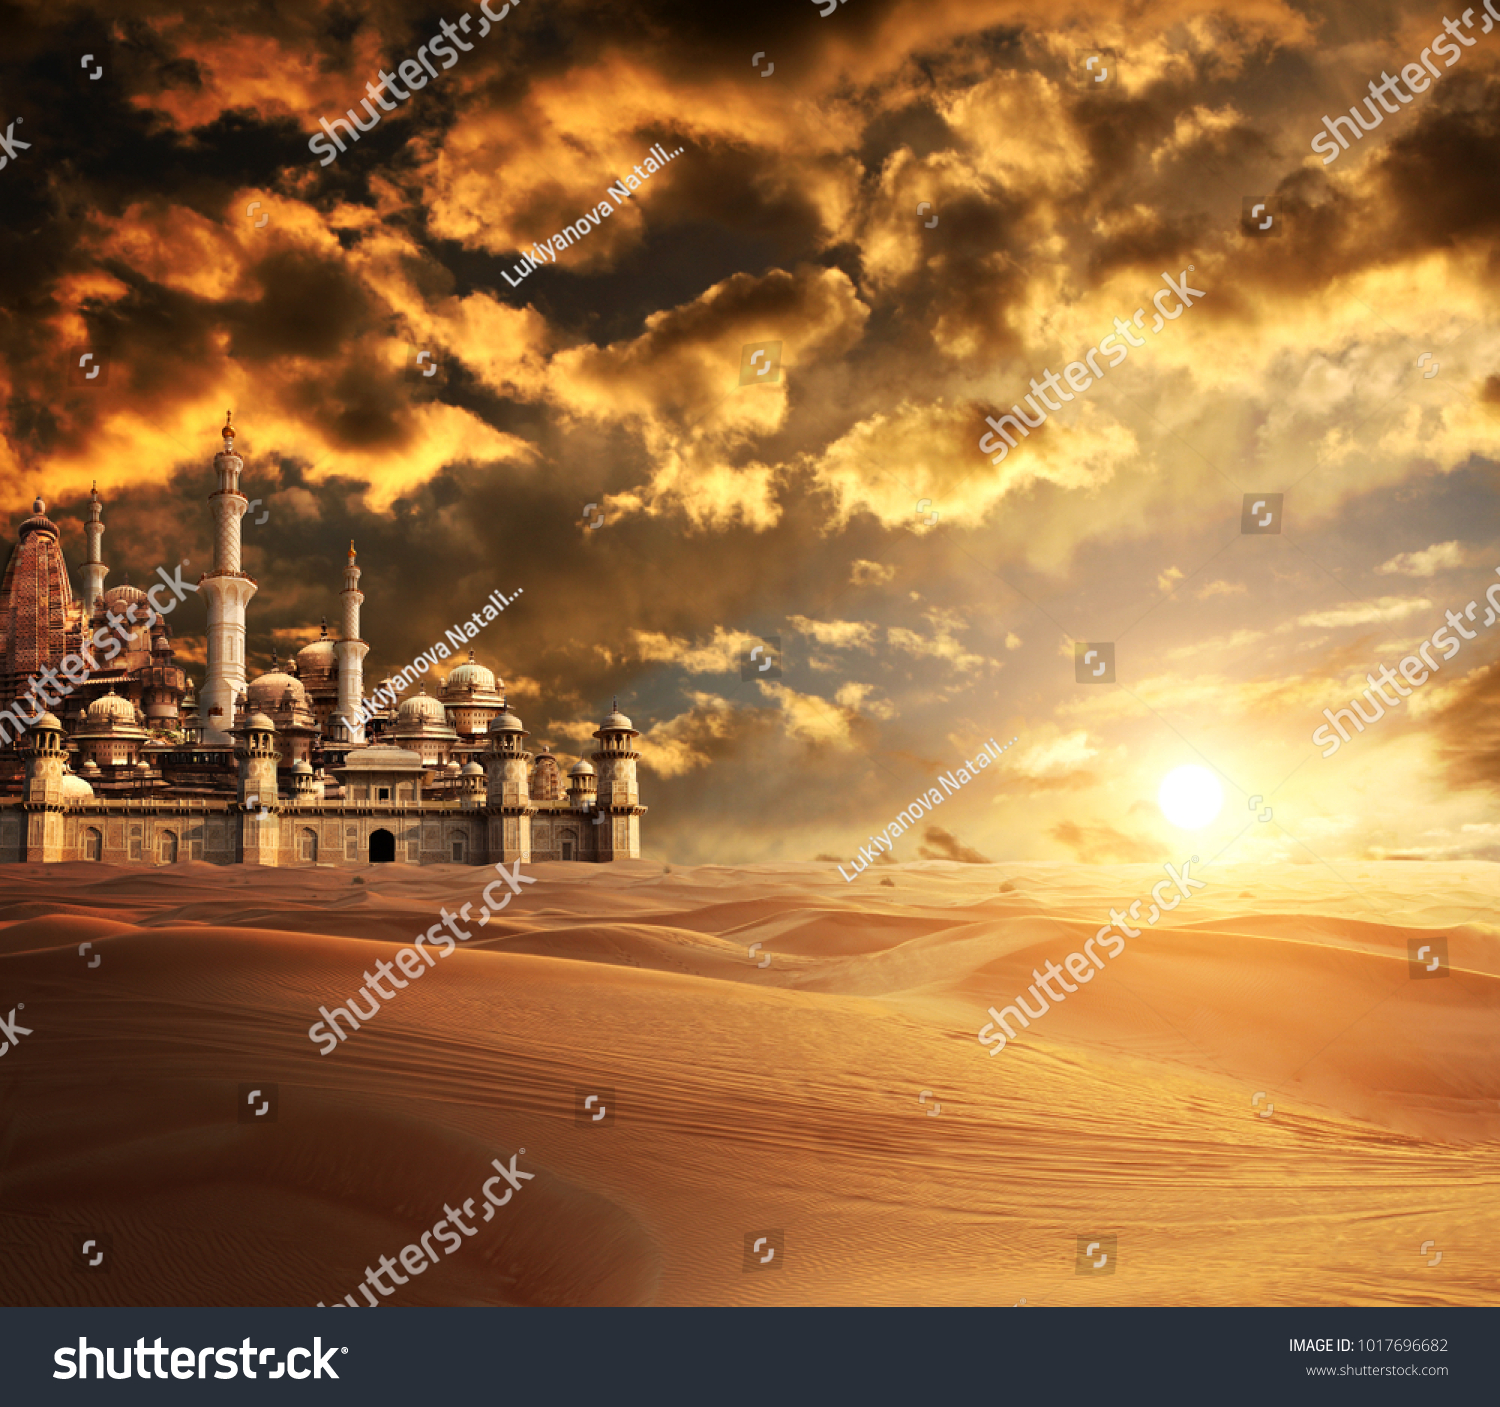 A fabulous lost city in the desert. On beautiful sunset sky background #1017696682